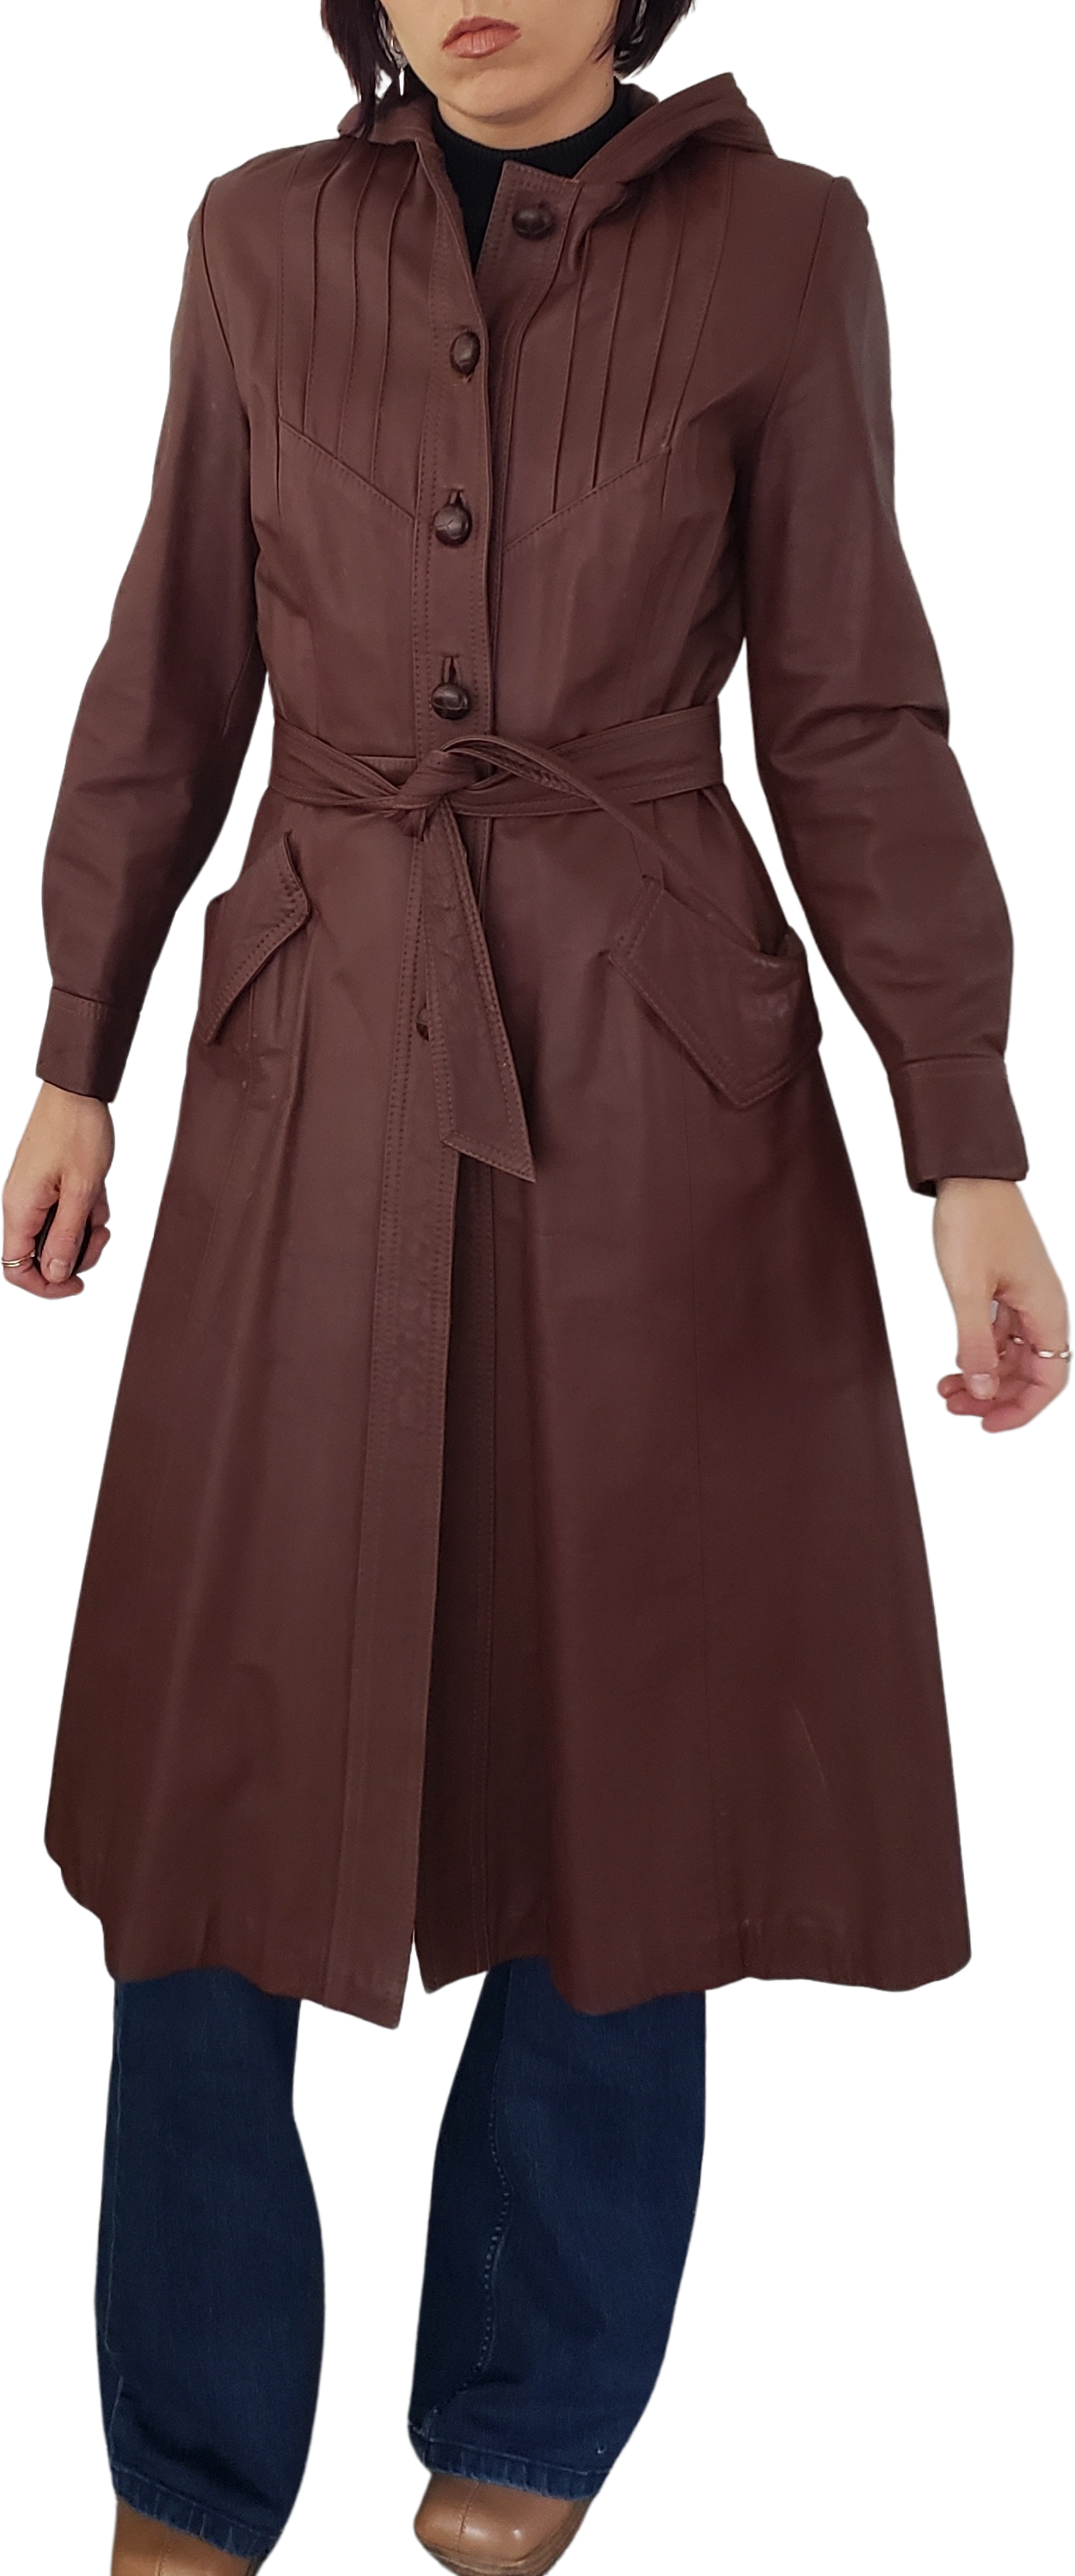 70s Burgundy Leather Trench Coat (M-L) - Imber Vintage